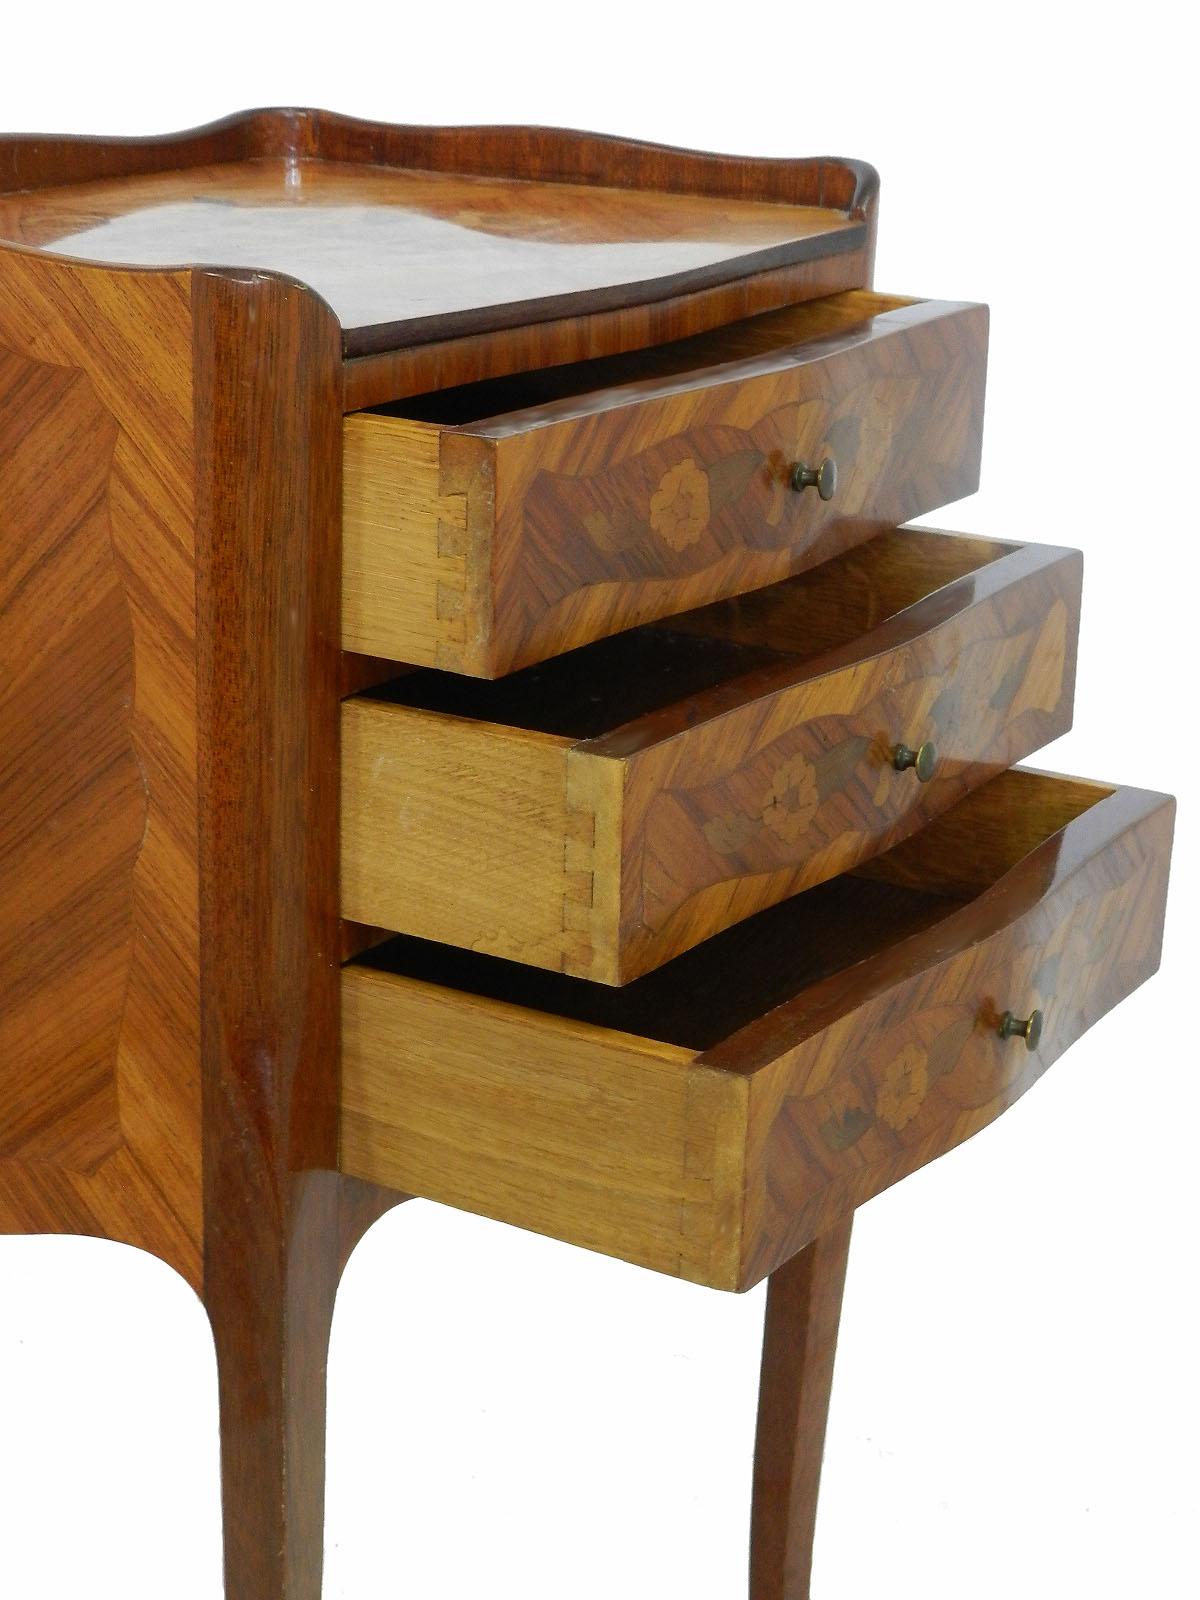 Inlay Pair of Nightstands French Bedside Tables Early 20th Century Louis Commodes